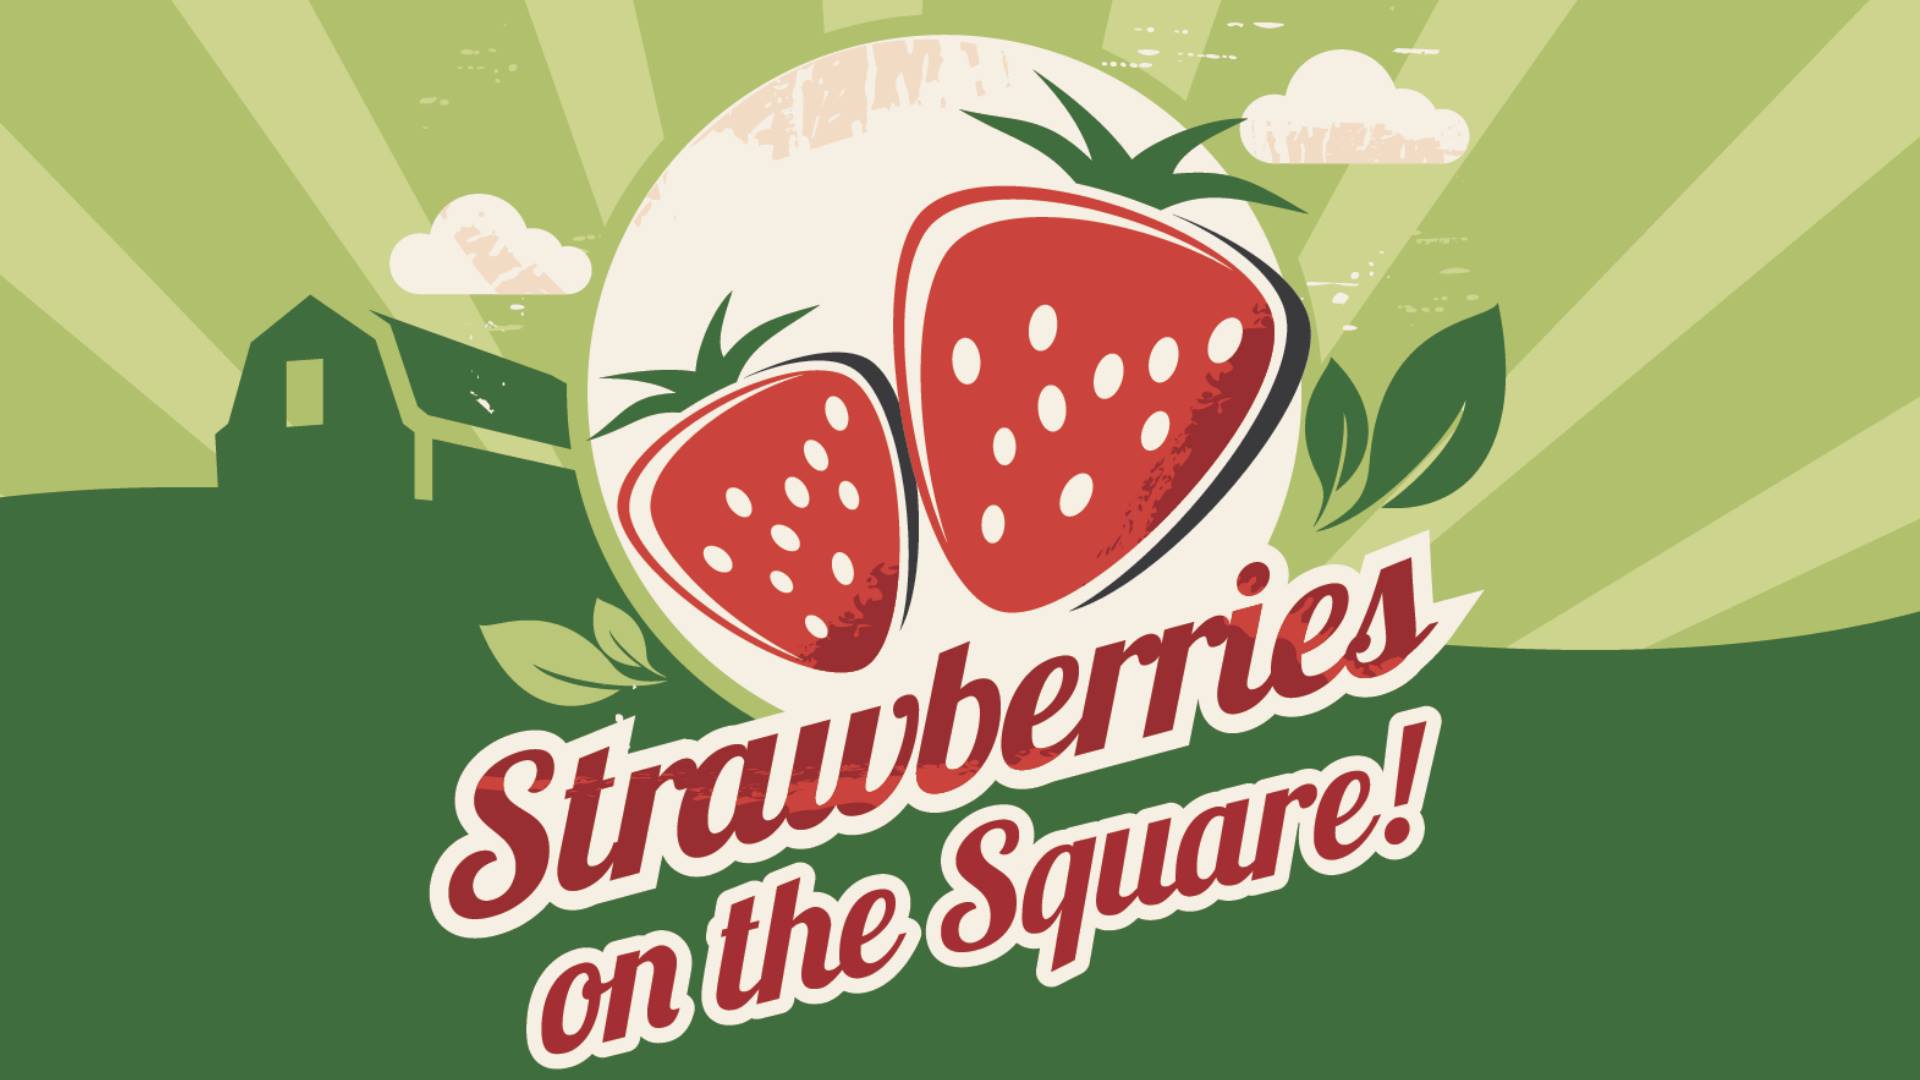 Strawberries on the Square